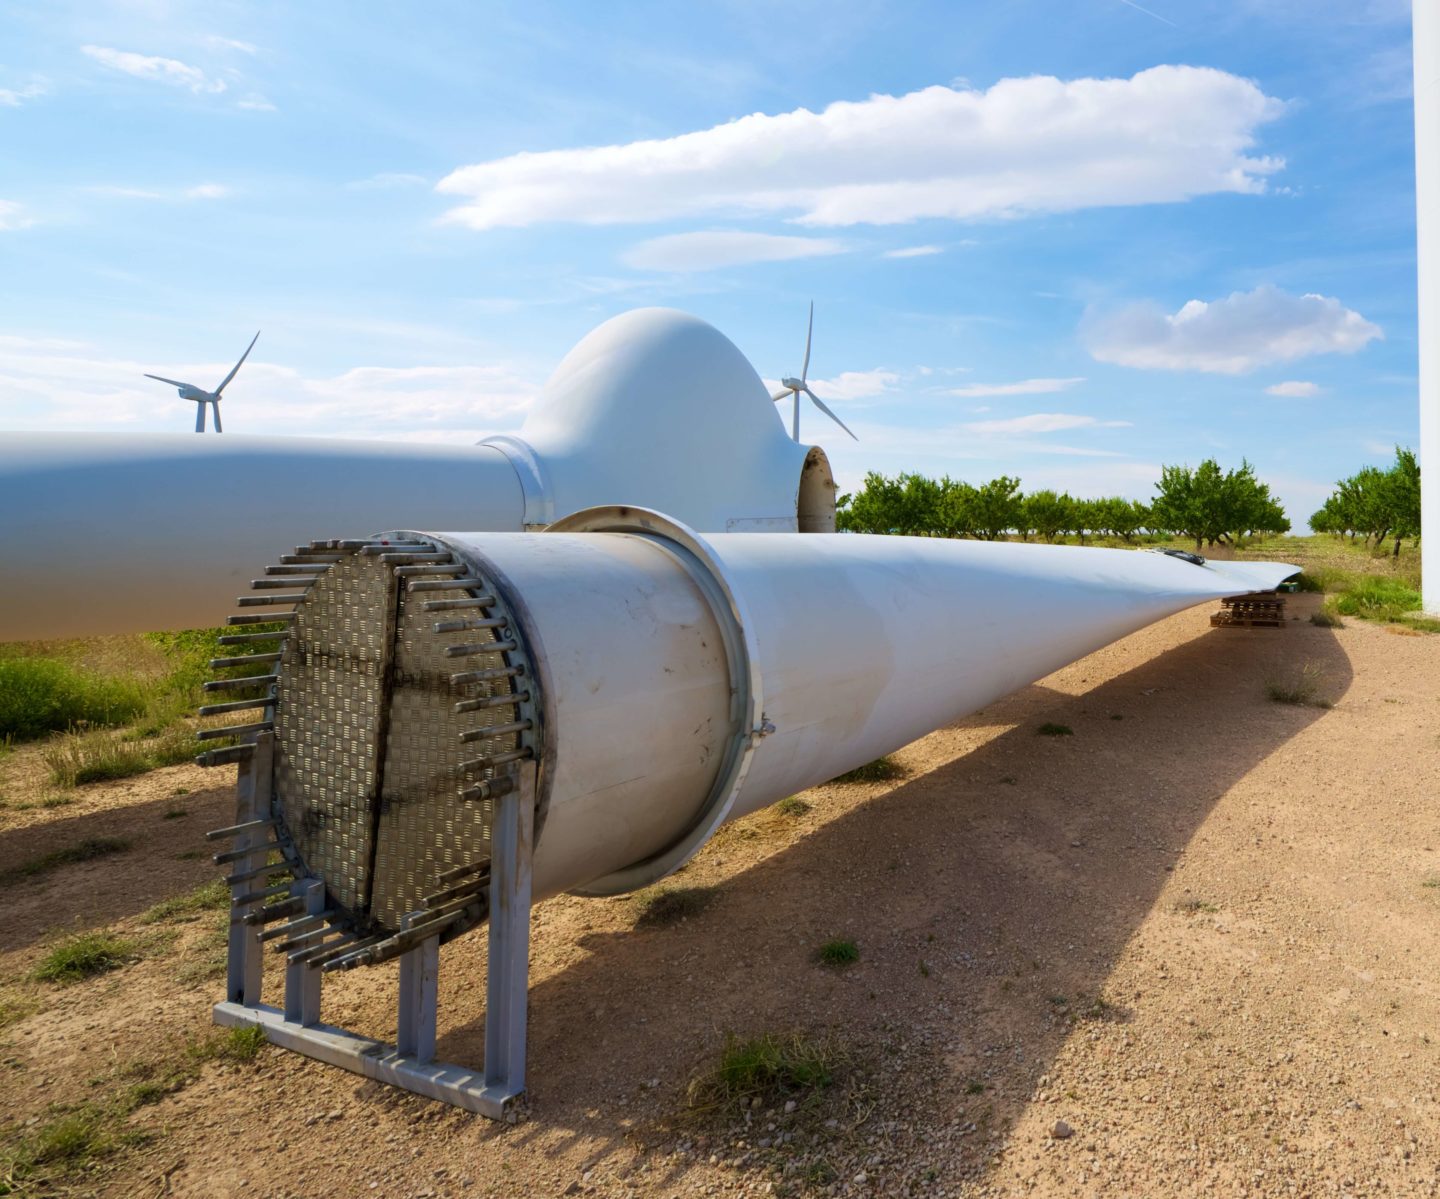 DECC can serve wind energy companies with sacrificial coatings